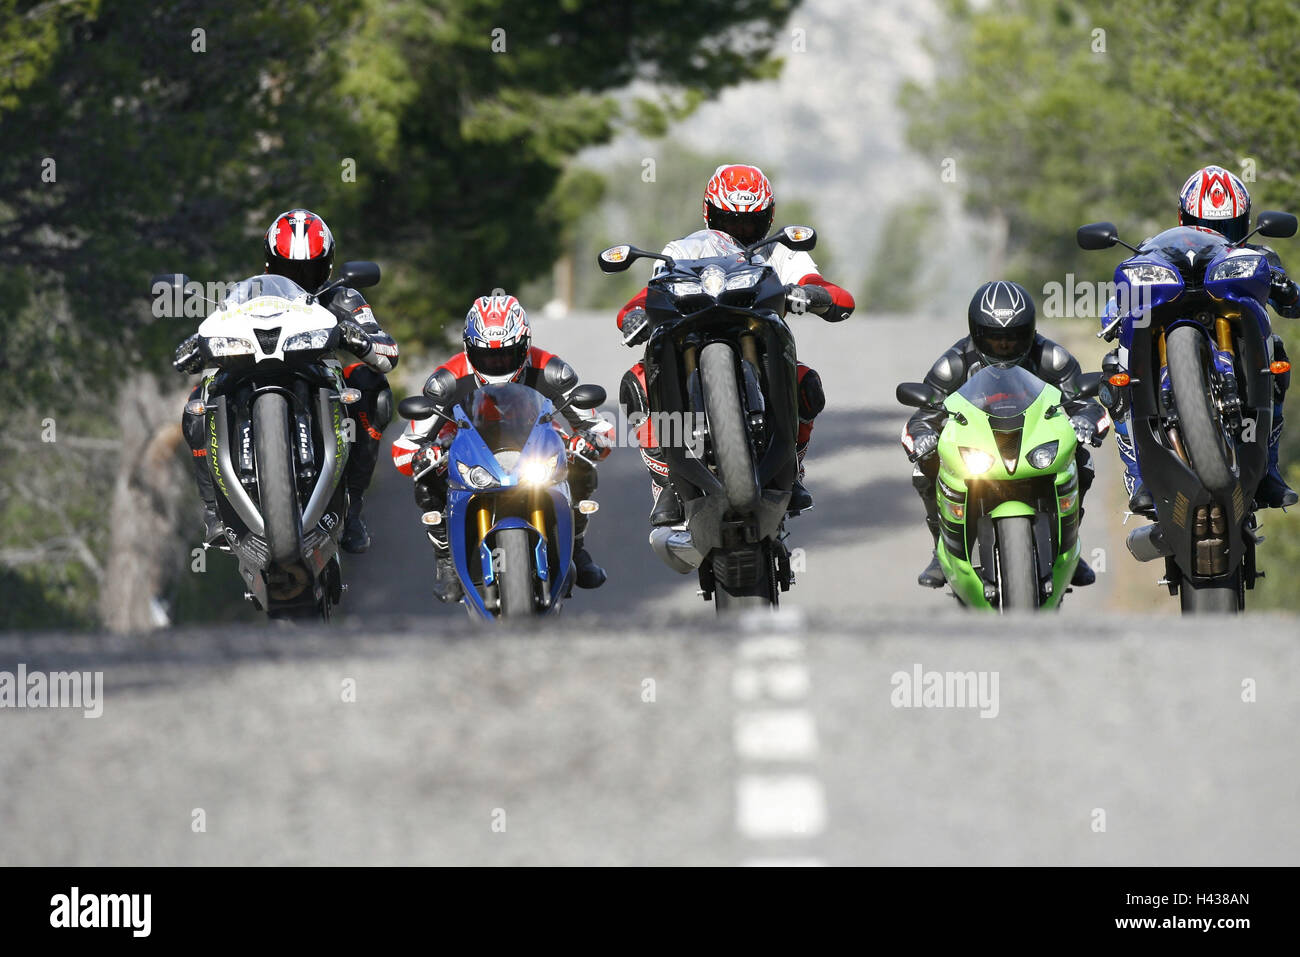 Country road, great sport motorcycles, journey, front view, Stock Photo